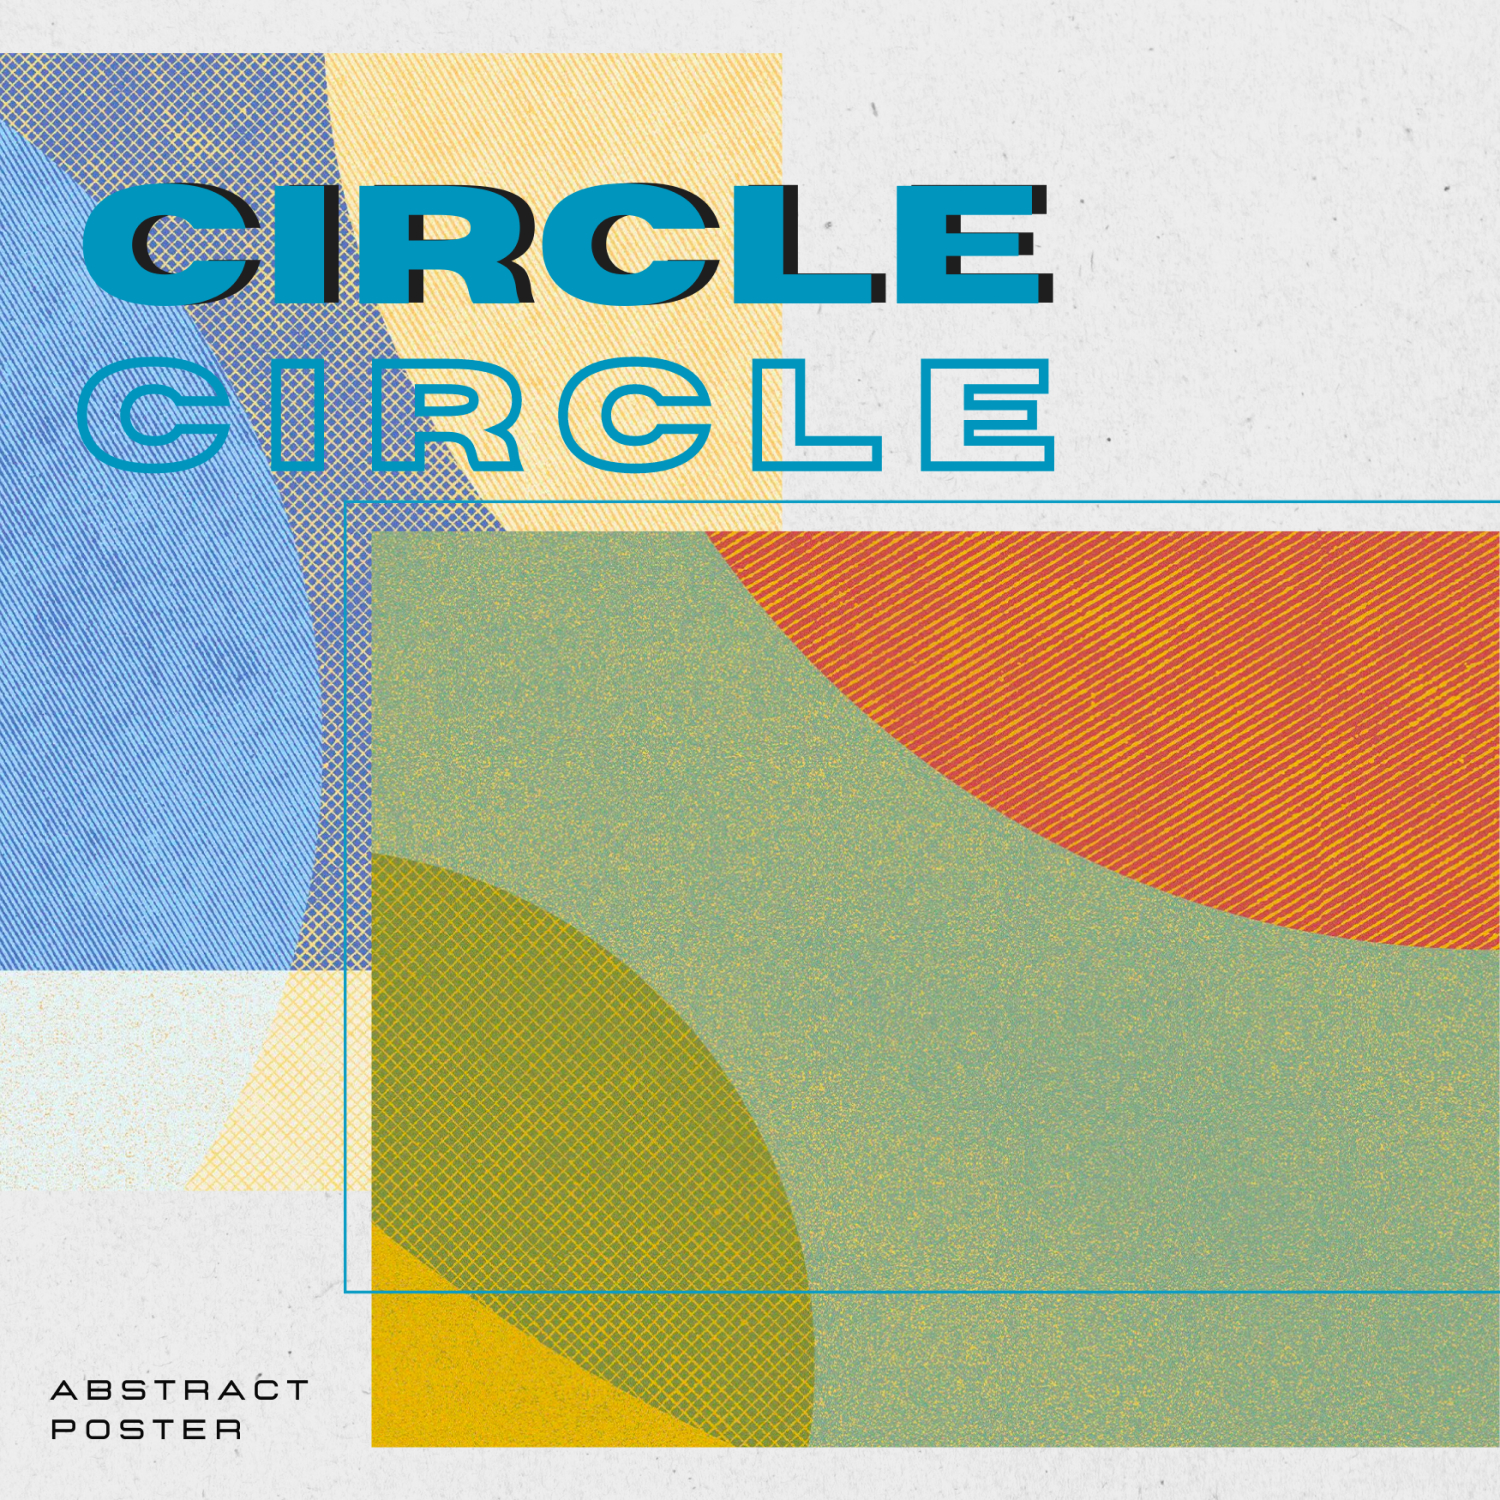 Preview circle abstract poster.